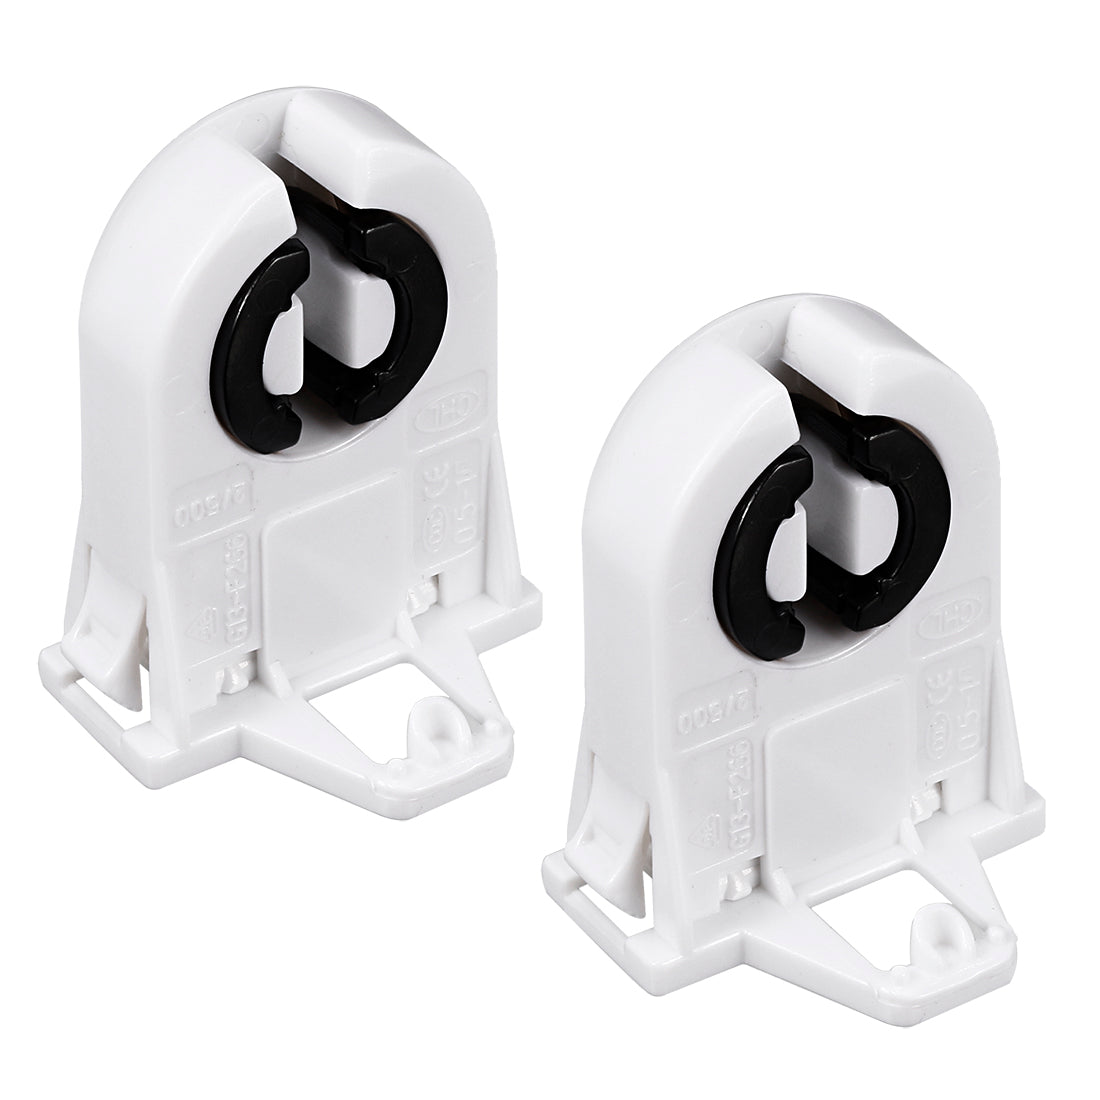 uxcell Uxcell 2 Pcs 2A T8 Socket G13 Base Fluorescent Lamp Holder Light Accessory White